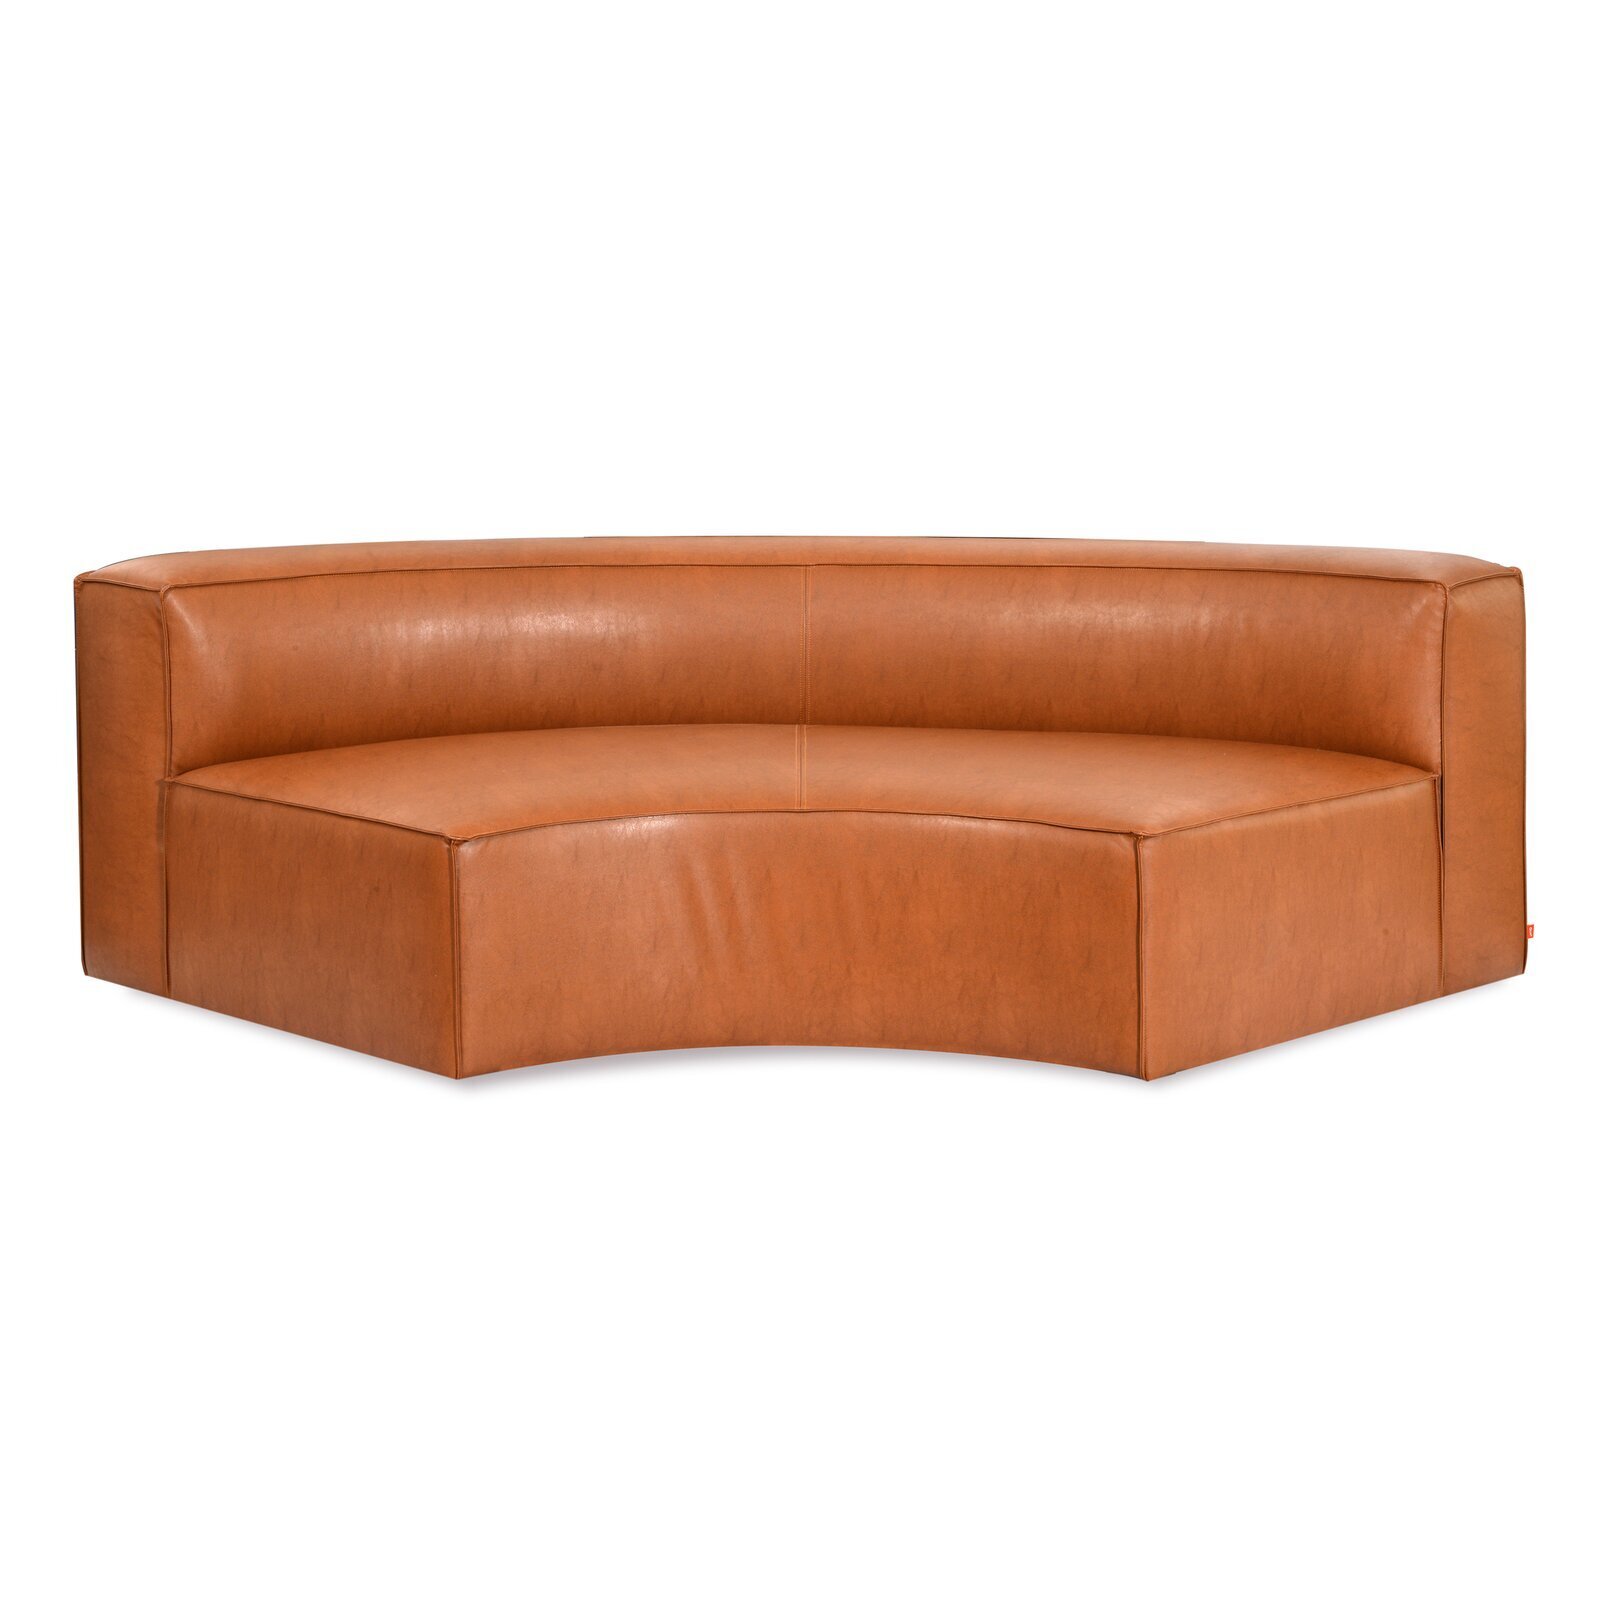 Contemporary Curved Leather Sofa